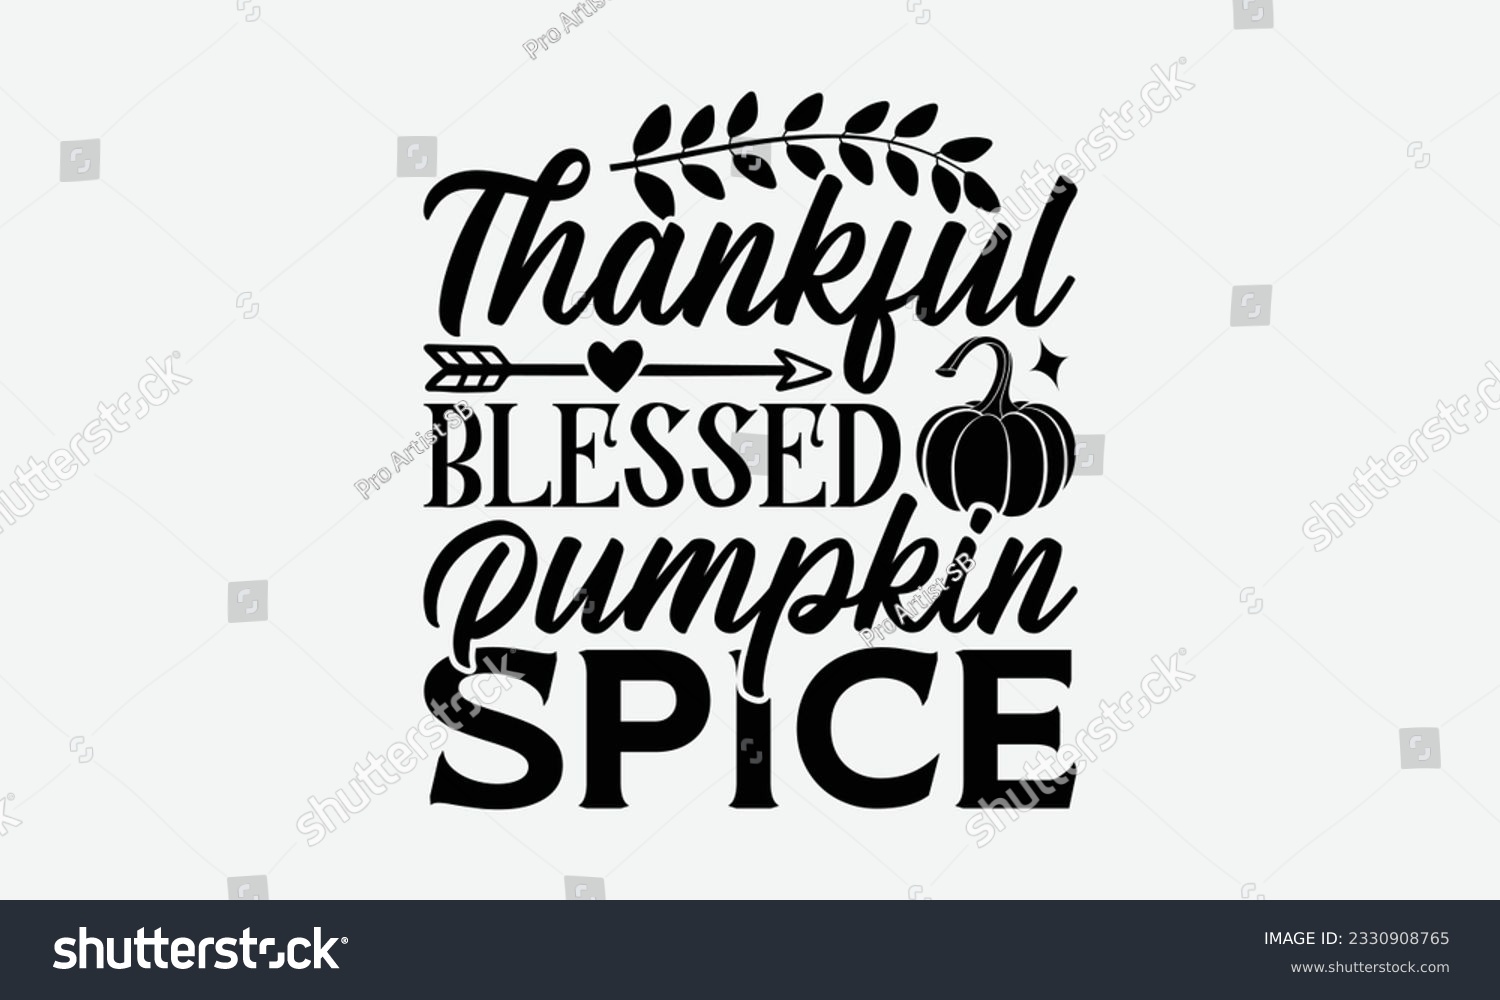 SVG of Thankful Blessed Pumpkin Spice - Thanksgiving T-shirt Design Template, Happy Turkey Day SVG Quotes, Hand Drawn Lettering Phrase Isolated On White Background. svg